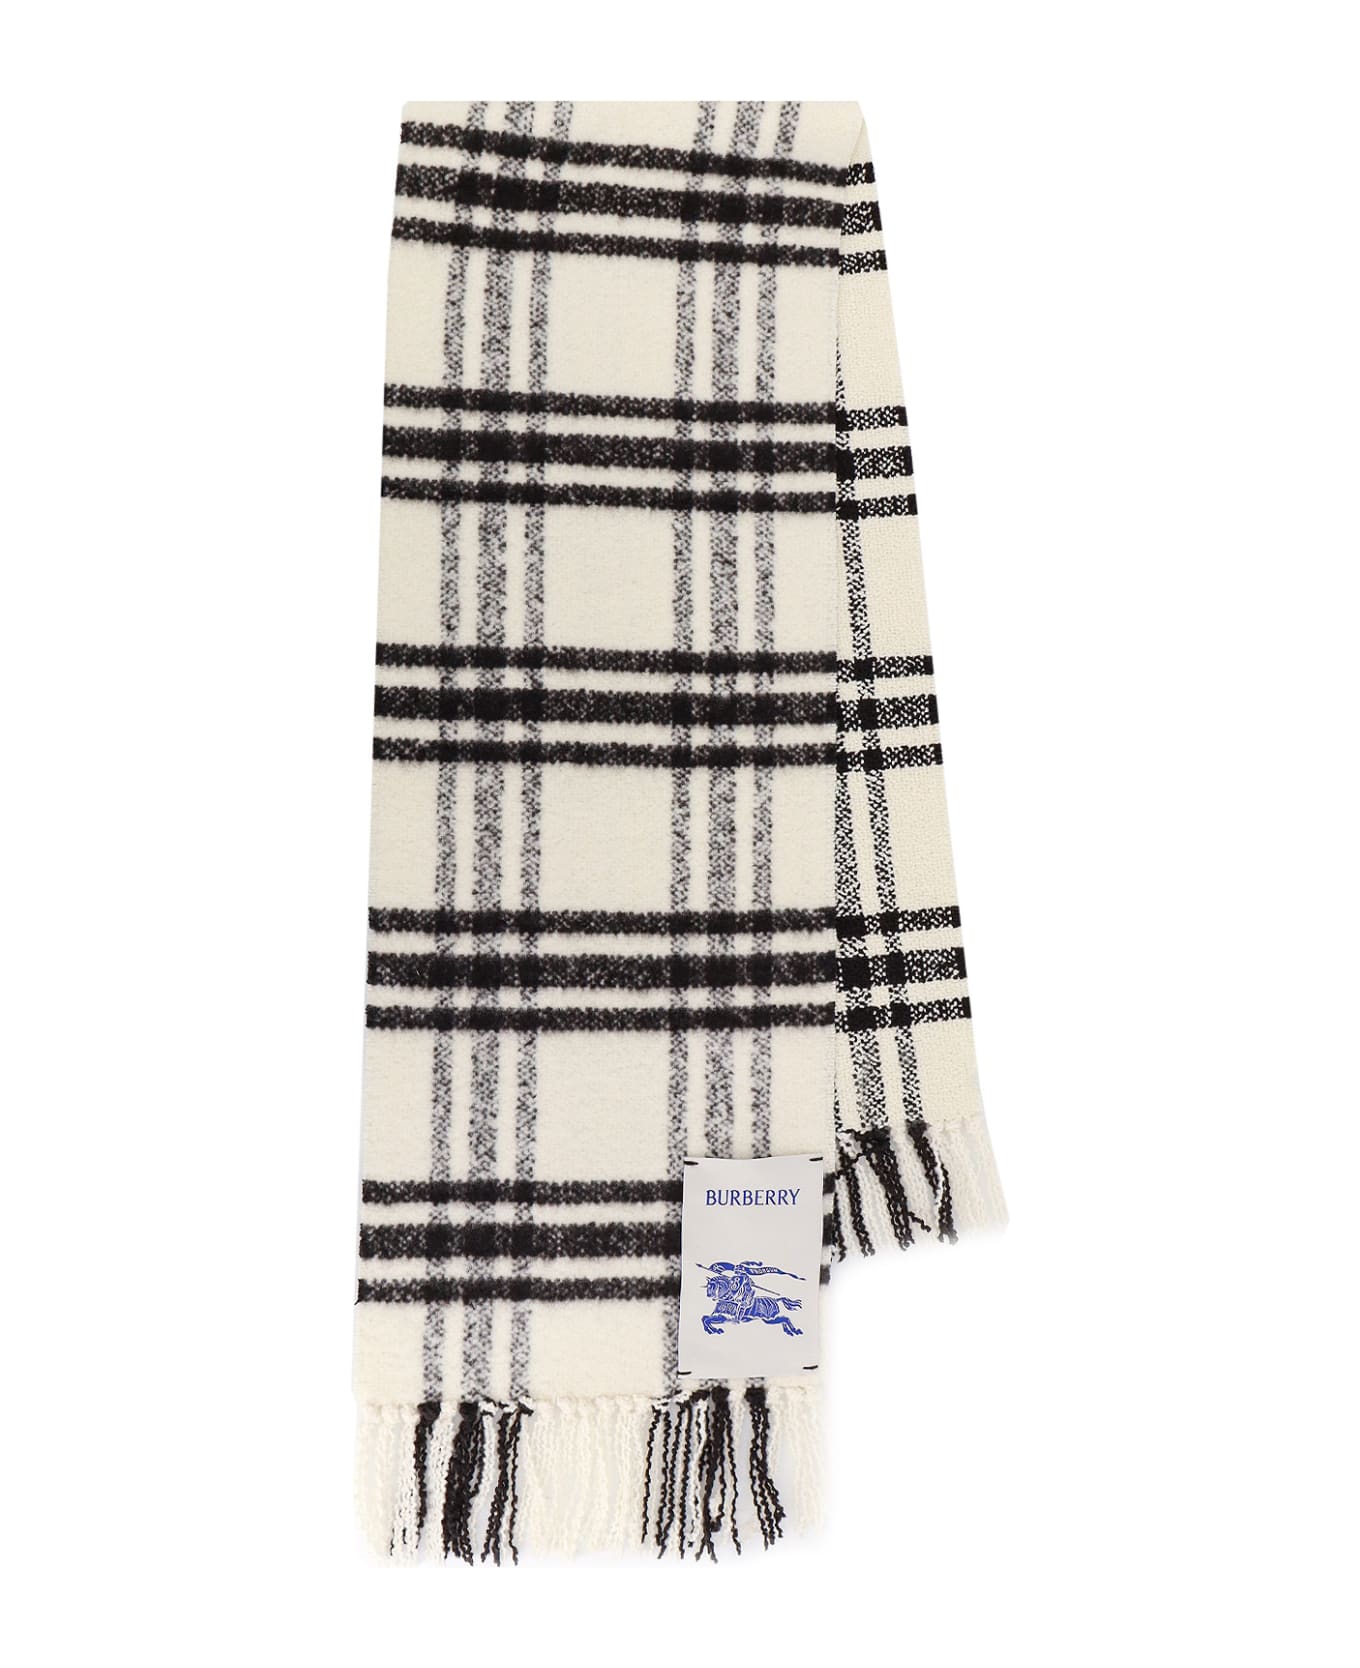 Burberry Scarf - Otter